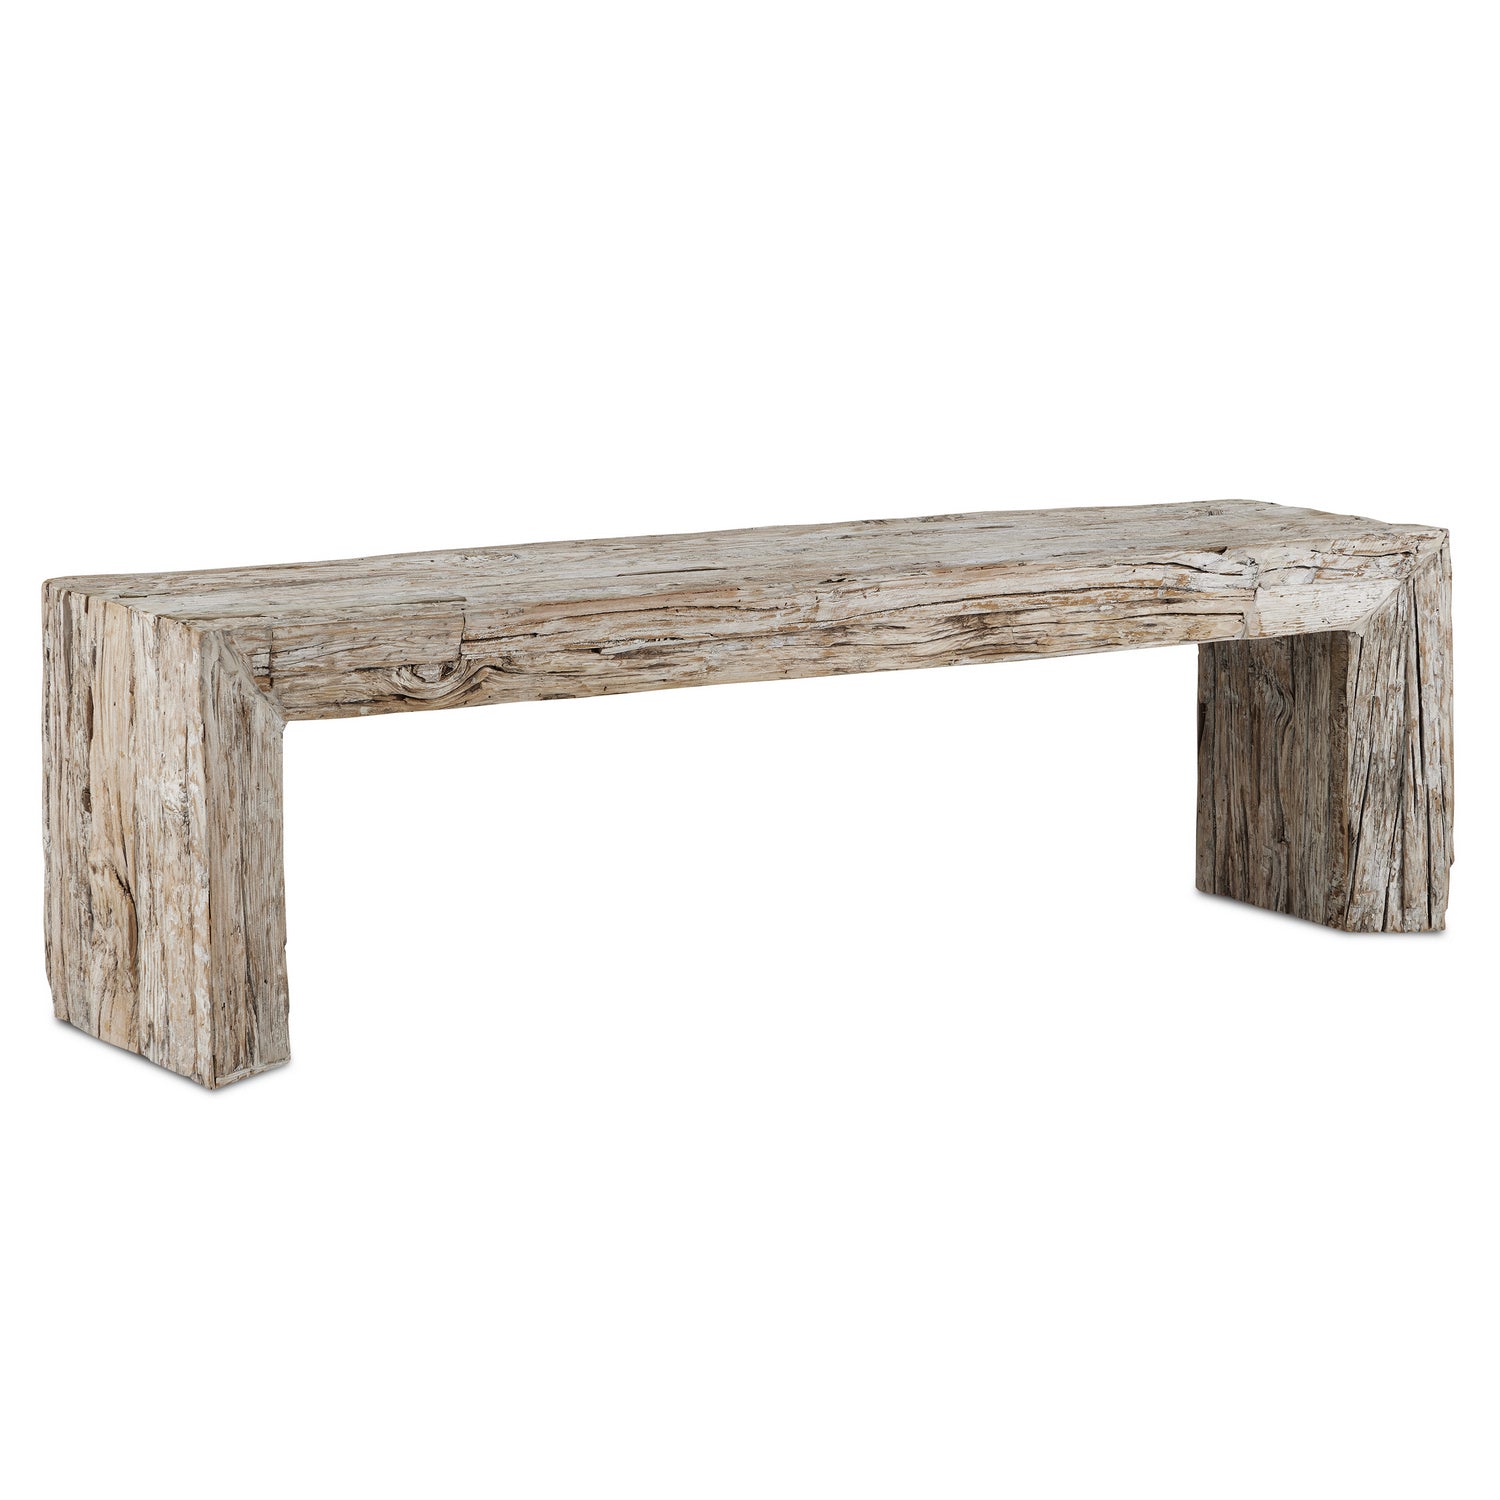 Currey and Company - 3000-0216 - Bench - Kanor - Whitewash